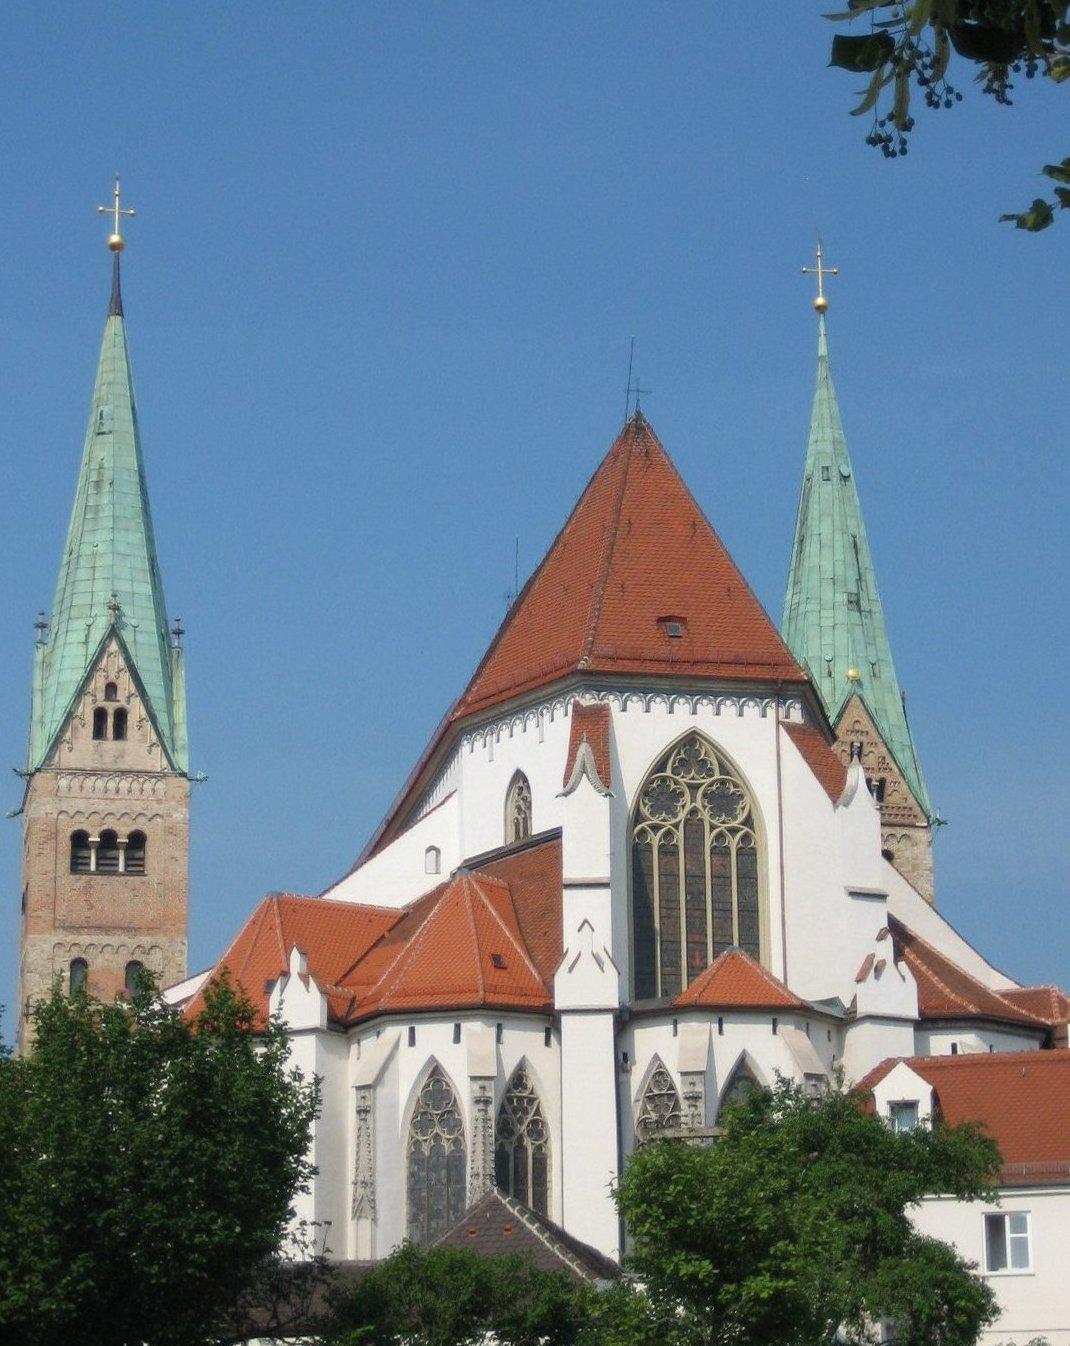 Members of abuse commission in German diocese resign, citing lack of transparency